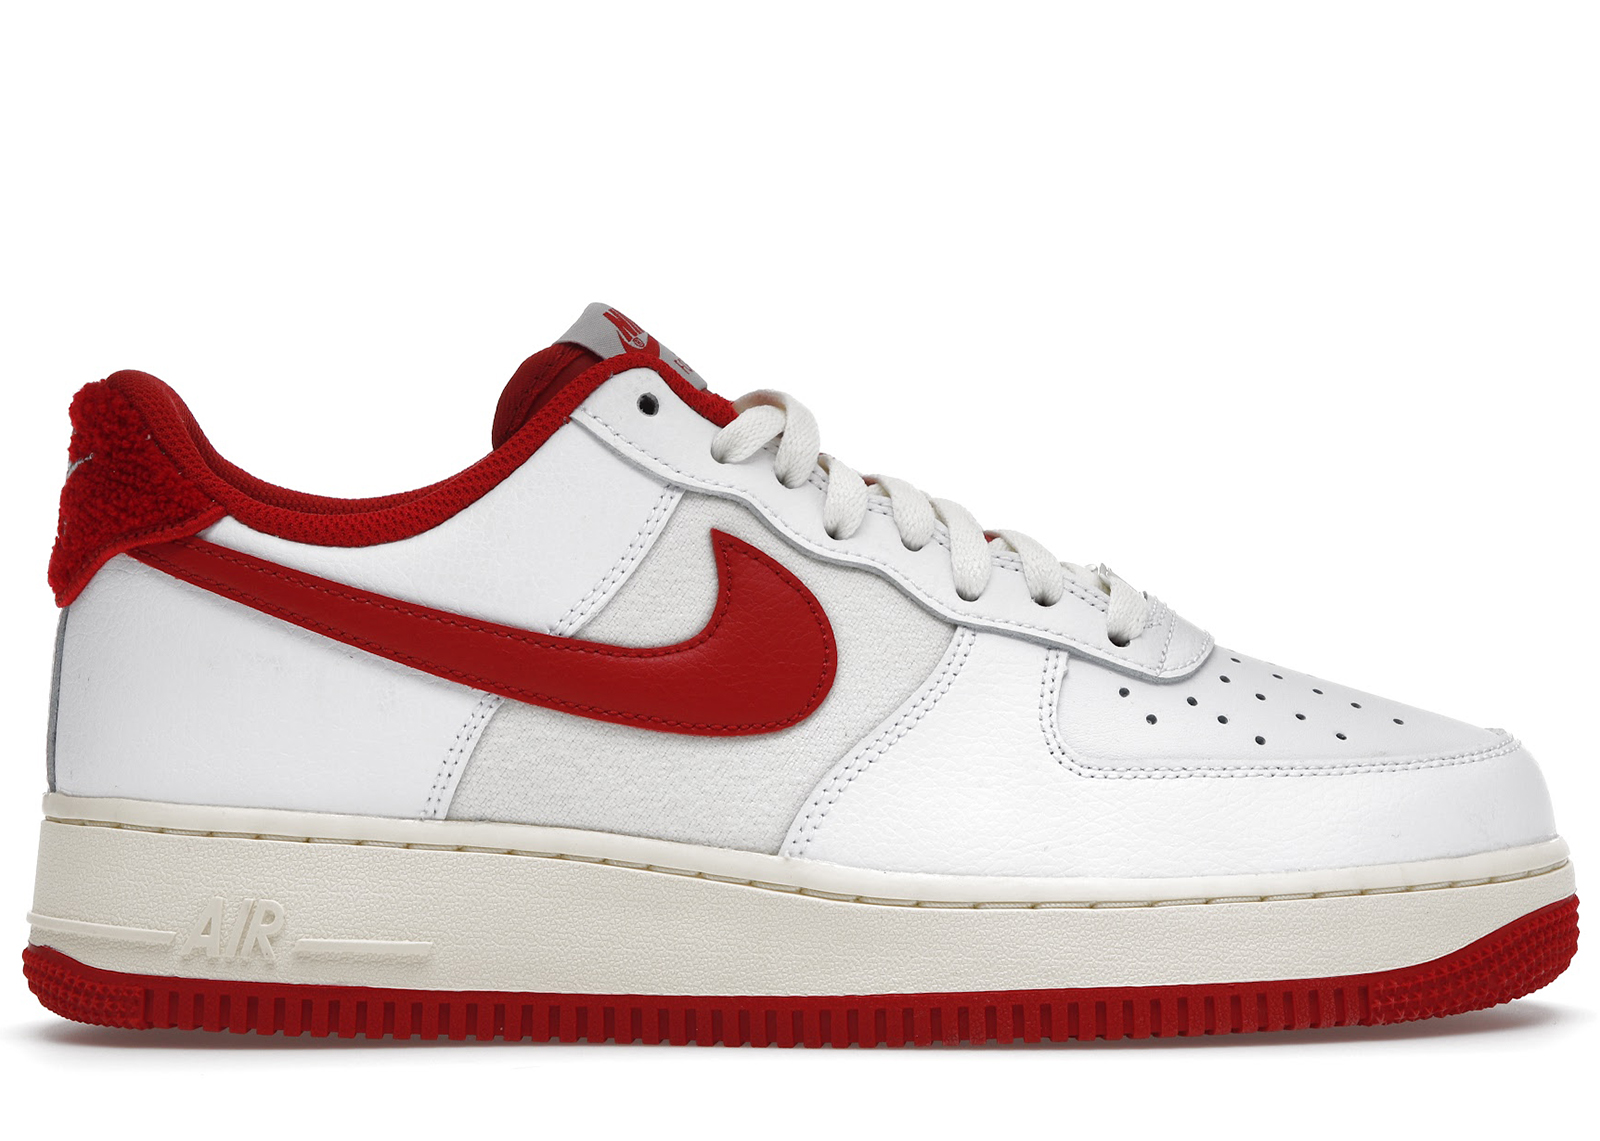 Nike Air Force 1 Low '07 White Gym Red (2021)